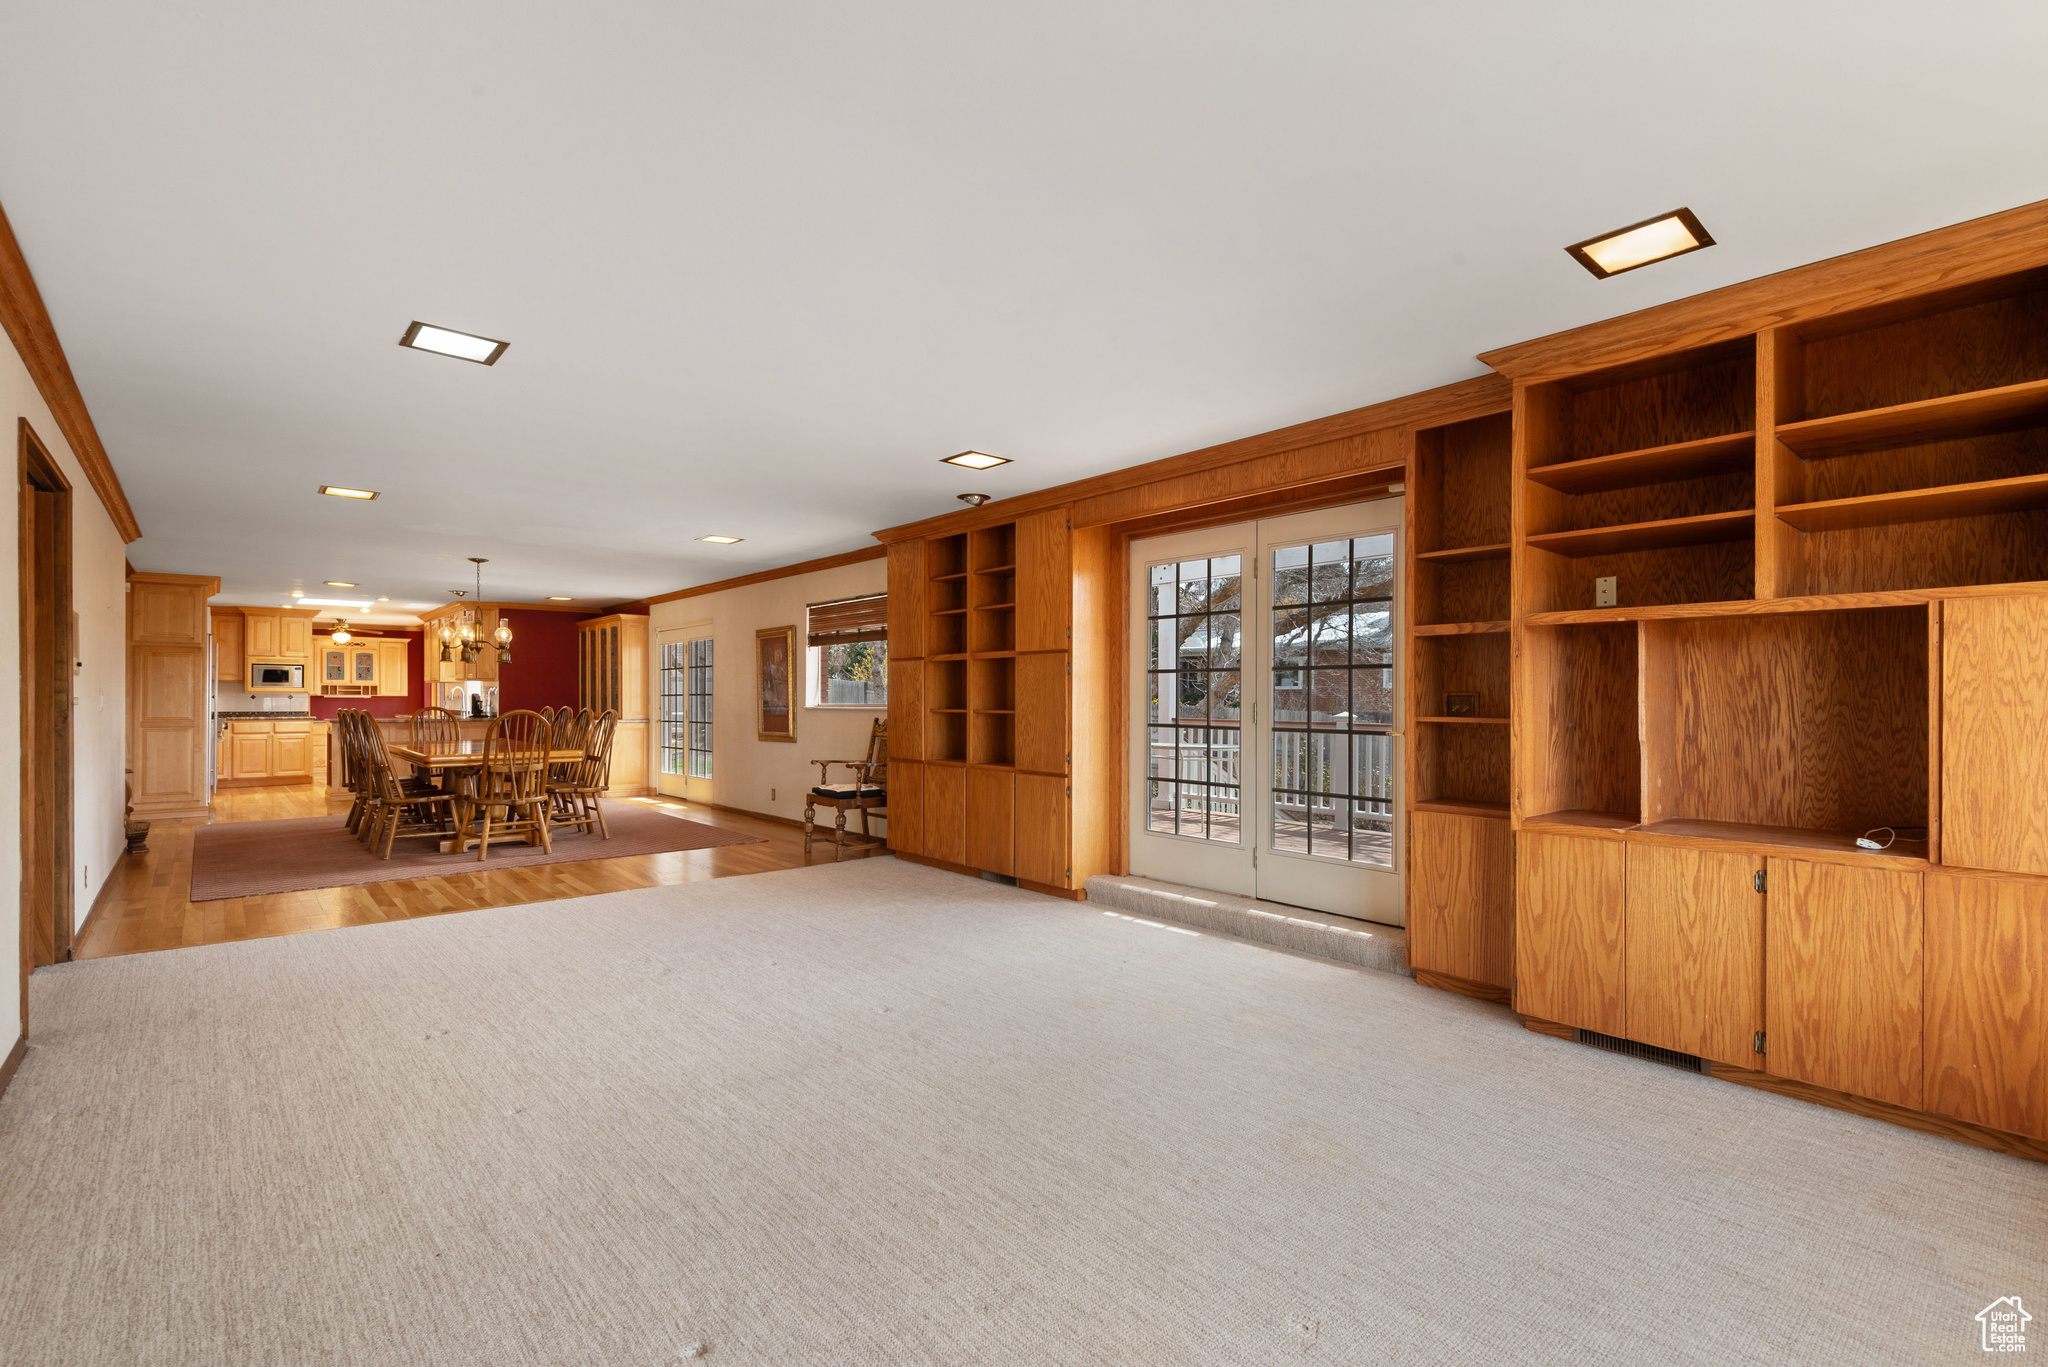 Family Room with Built in Bookcases/Entertainment center.